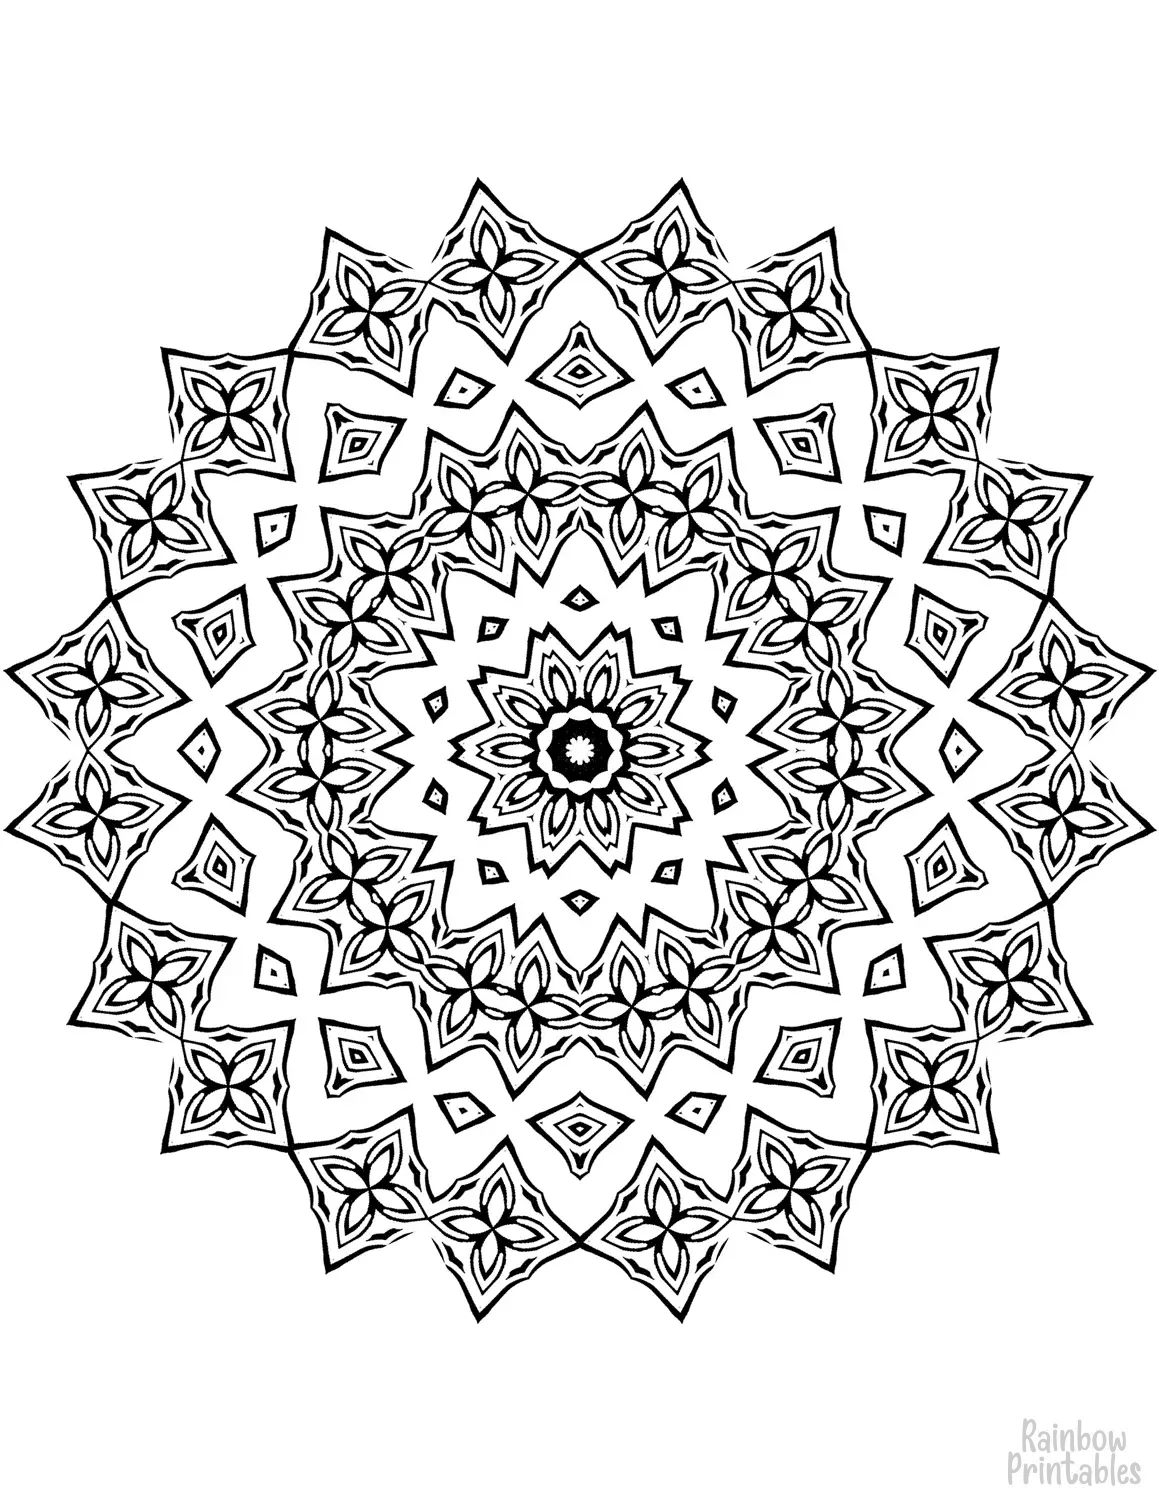 SIMPLE FLORAL FLOWER Mandala Coloring Pages for Kids Adults Boredom Art Activities Line Art